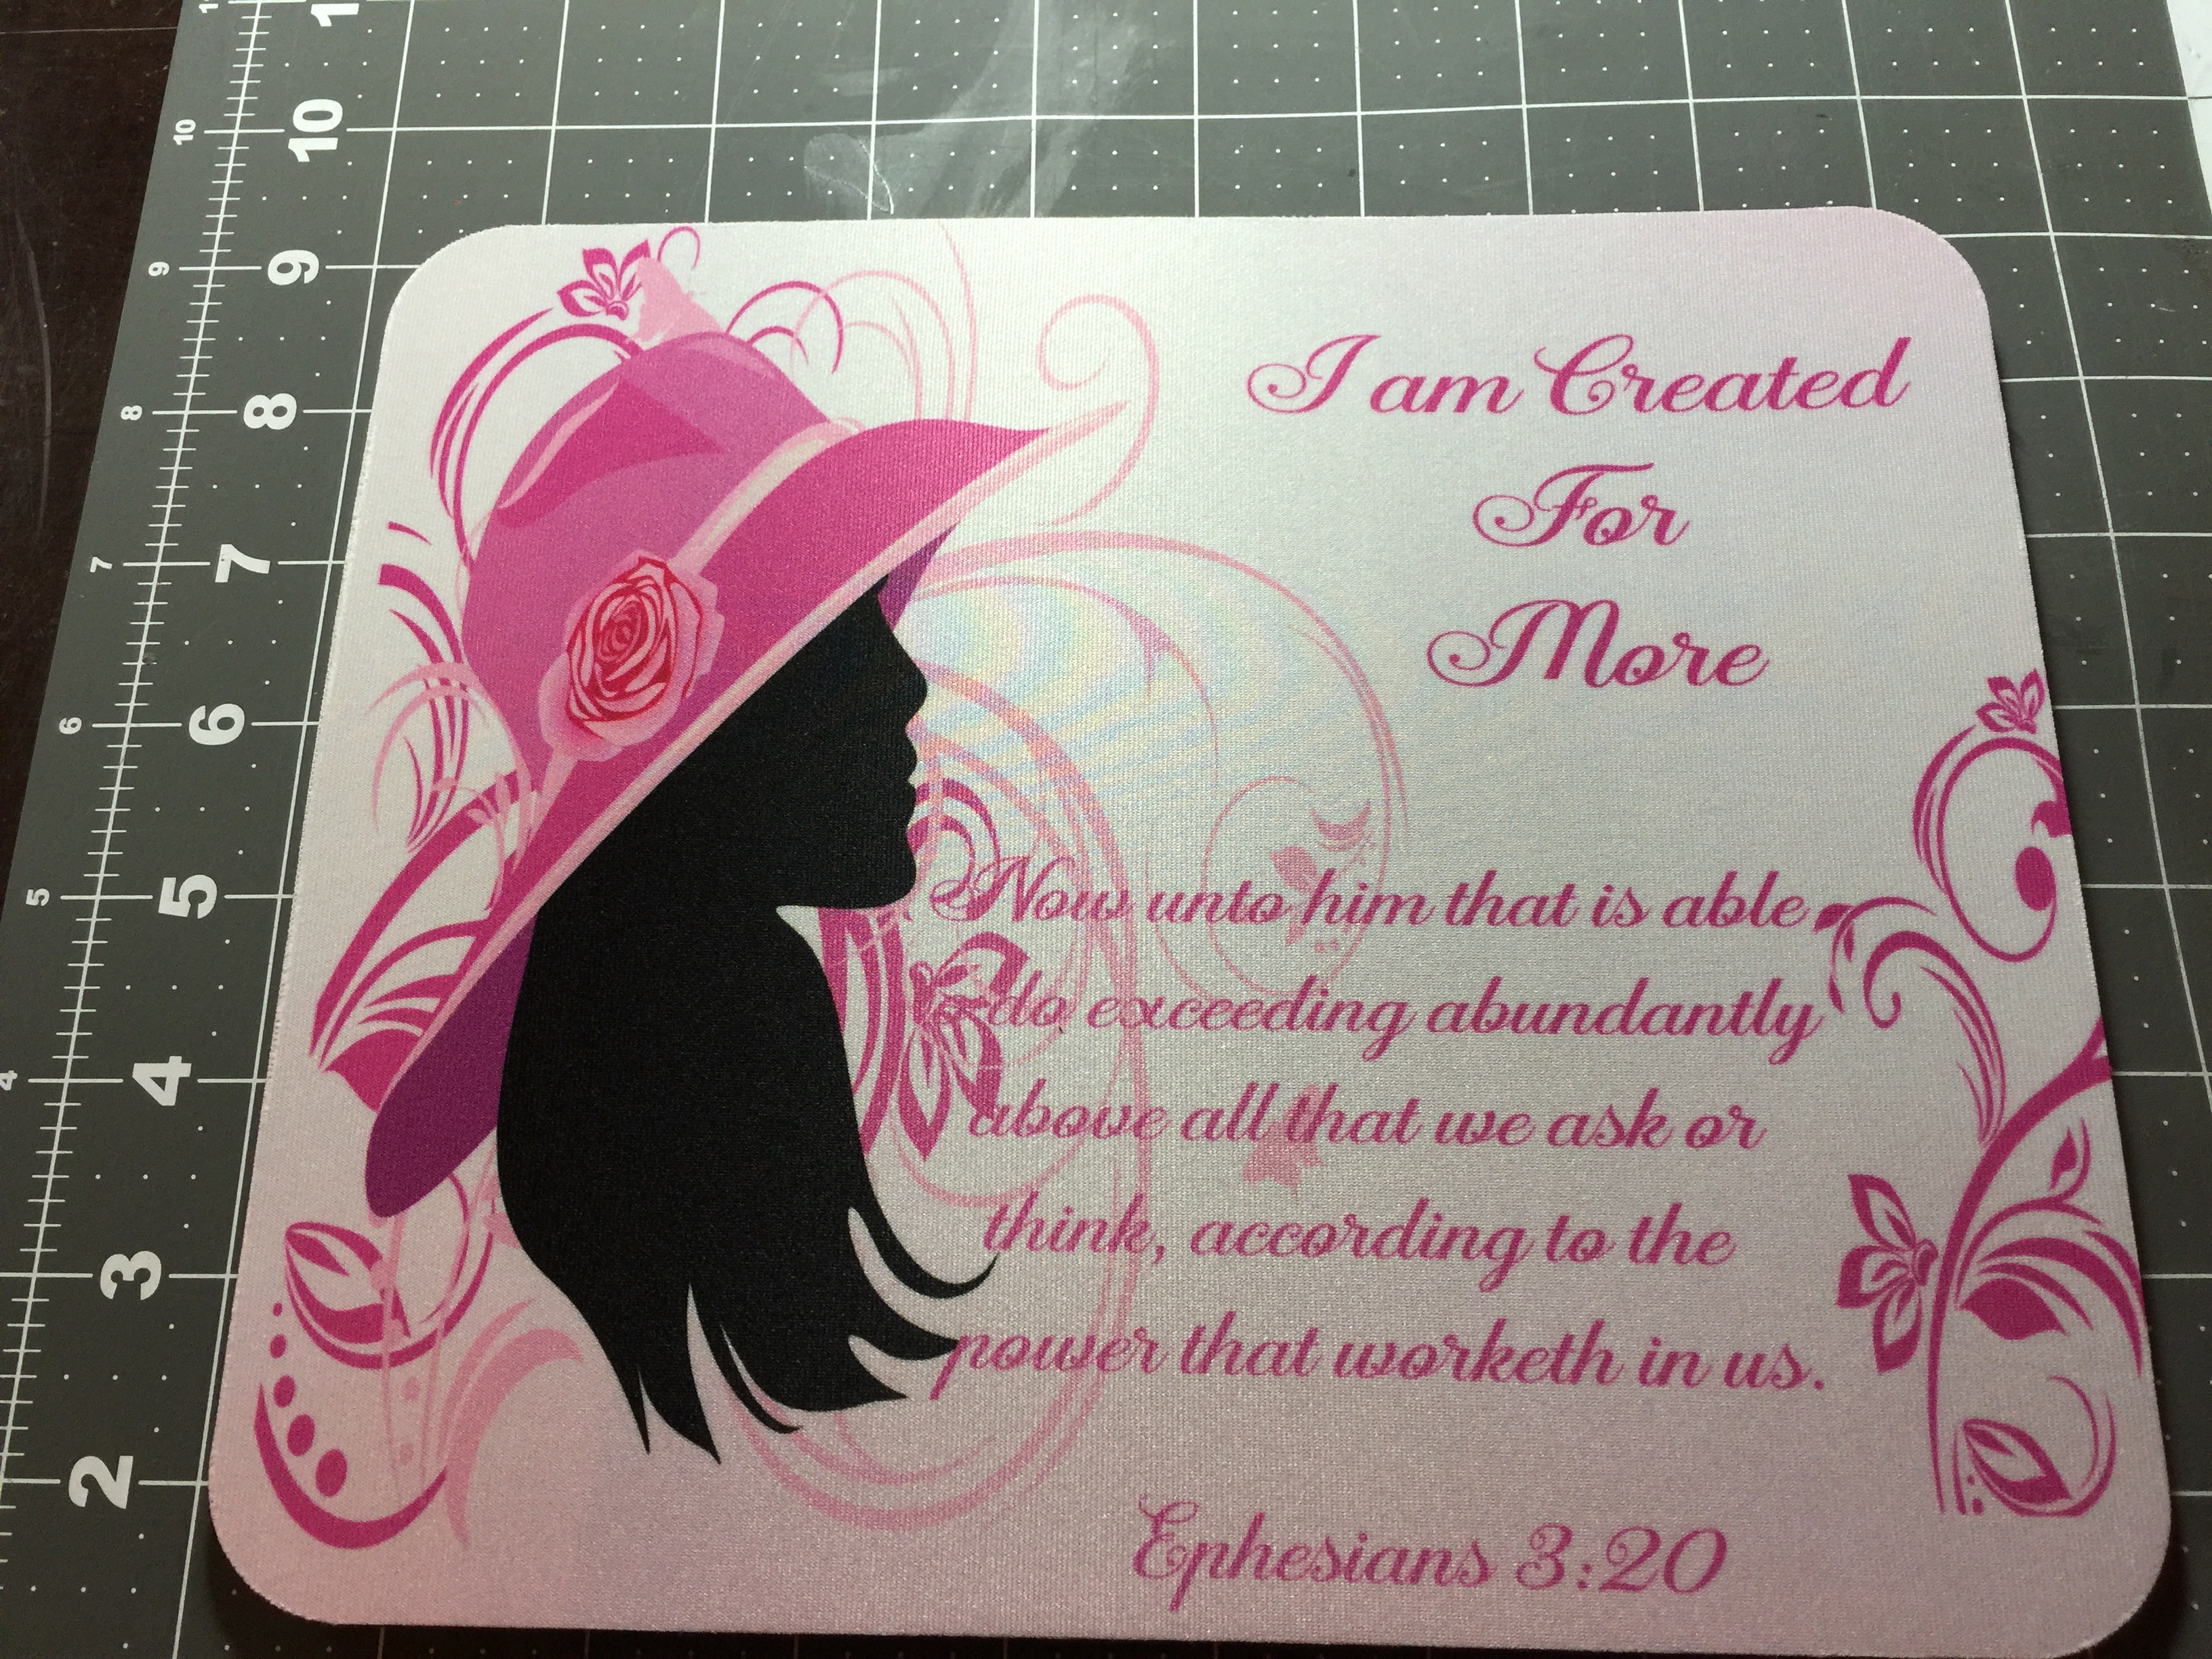 I am Created for More made with sublimation printing